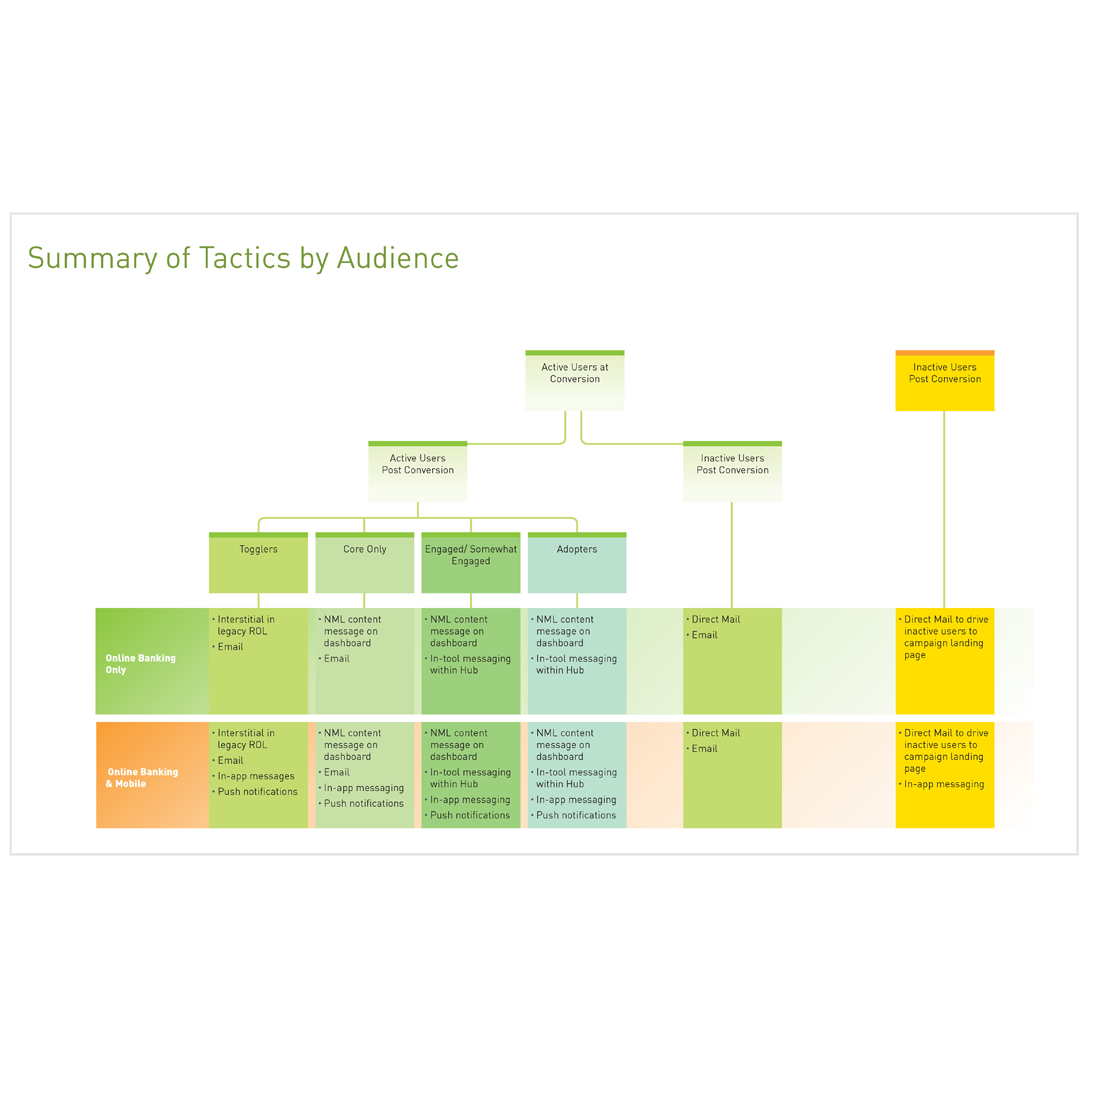 Huntington Online Hub Launch chart titled summary of tactics by audience